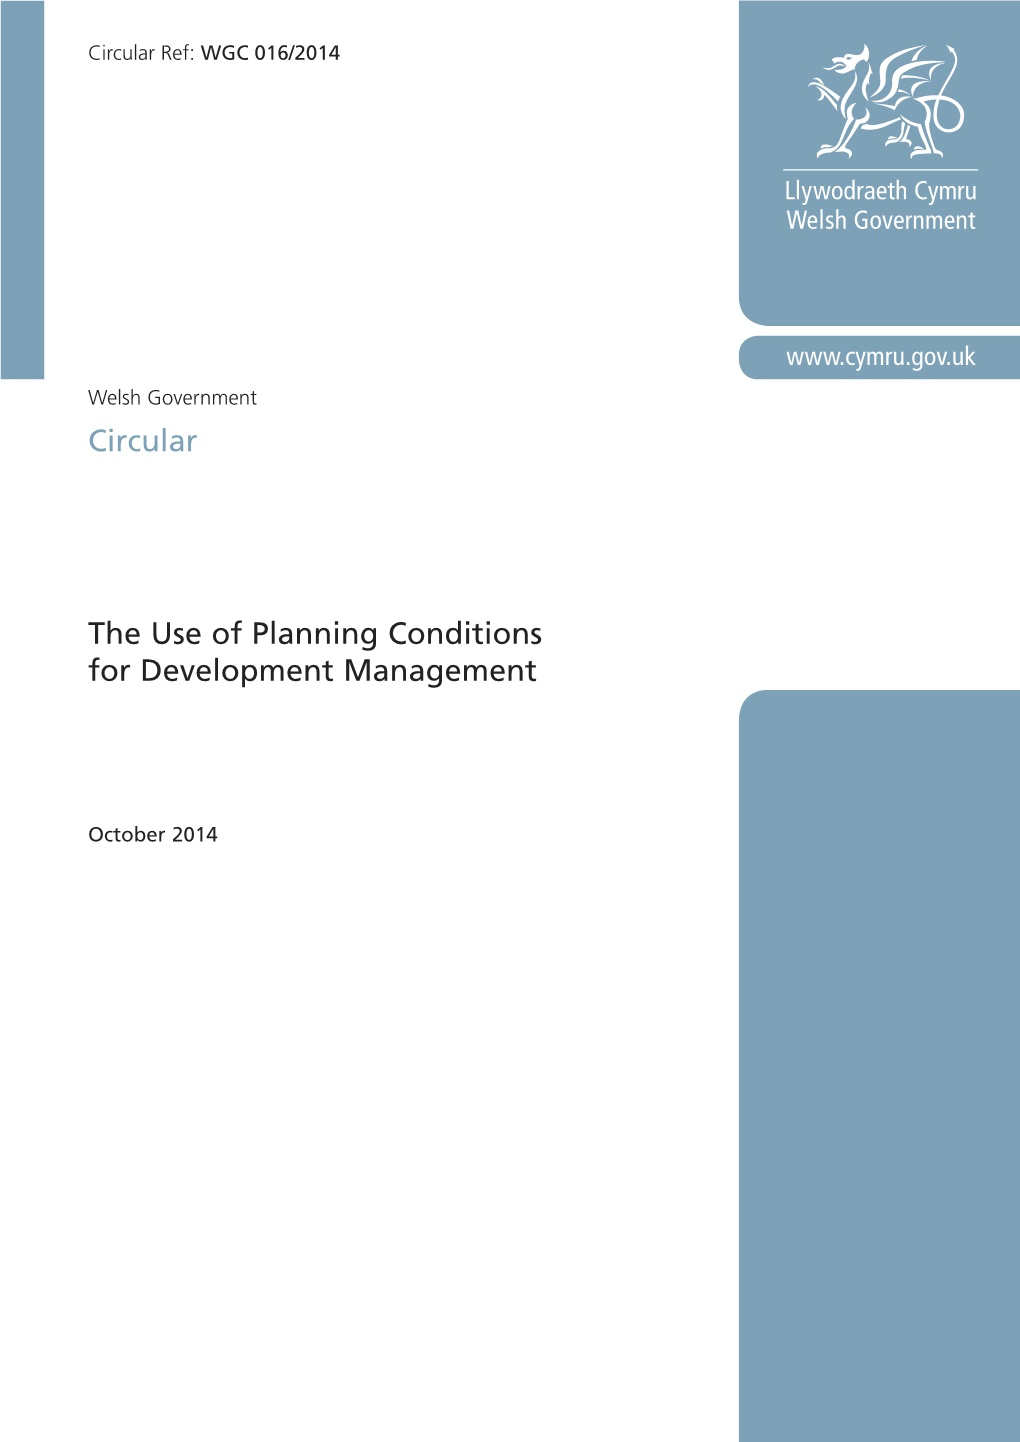 The Use of Planning Conditions for Development Management Circular